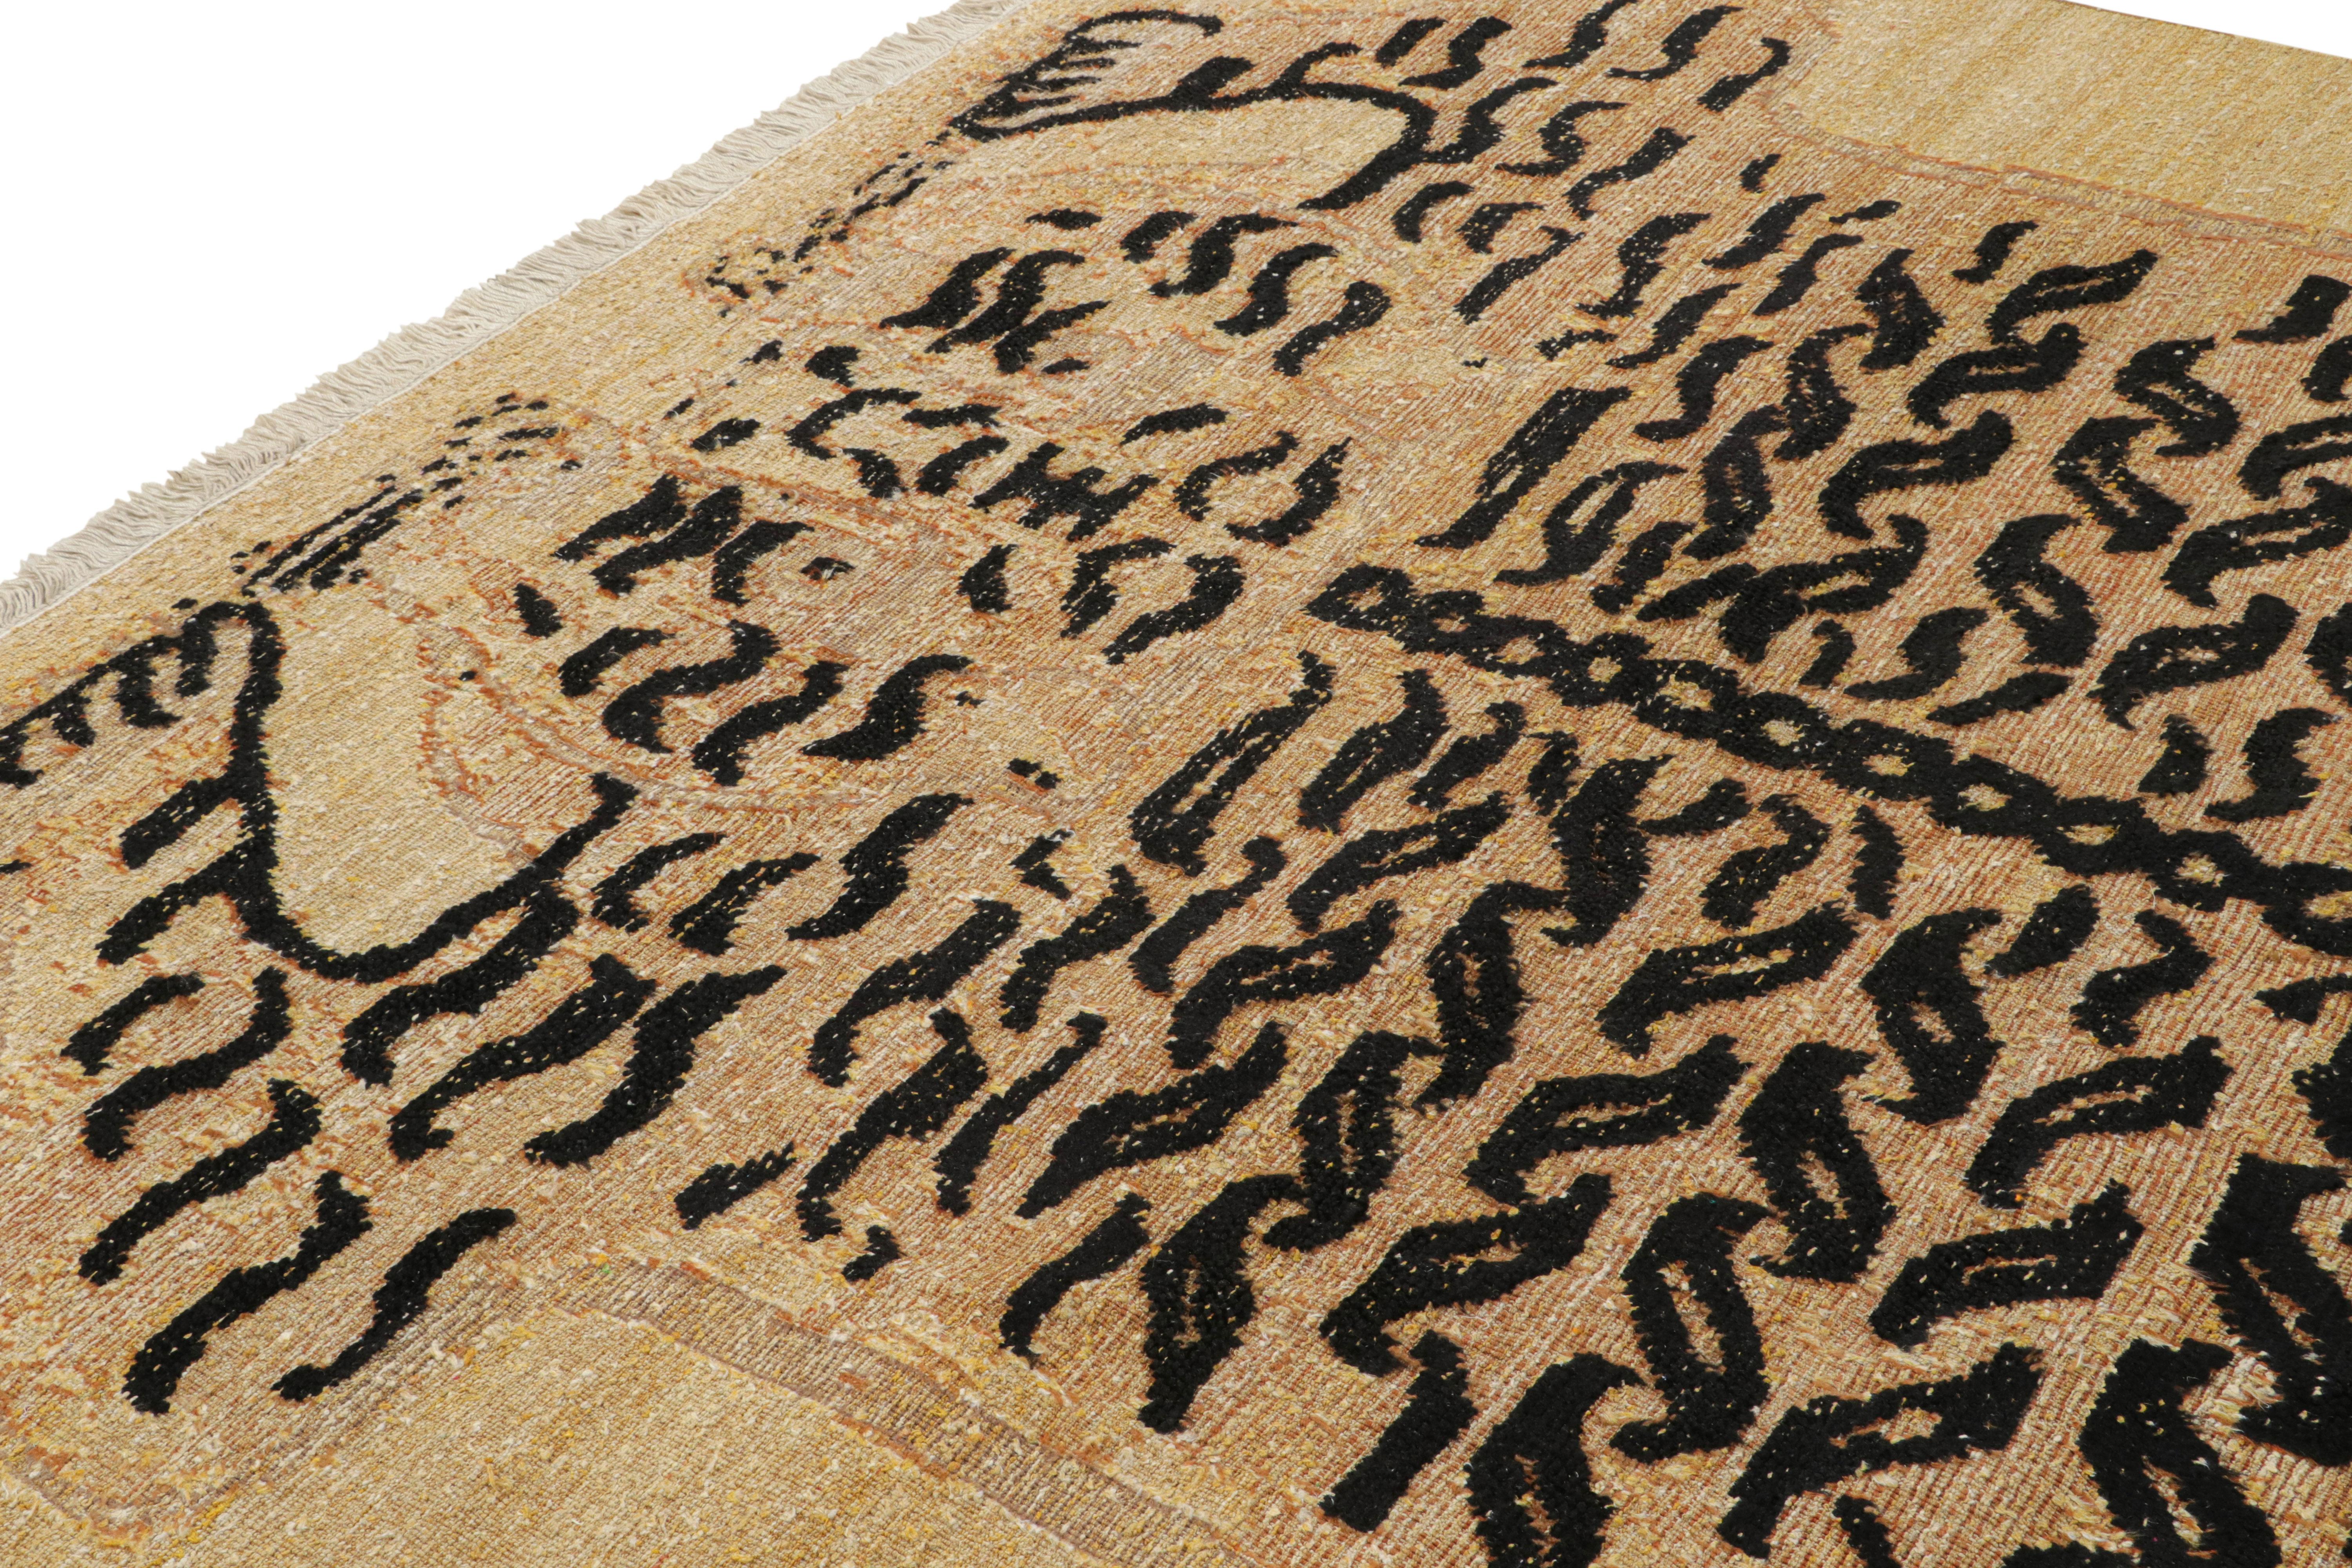 Hand-knotted wool, inspired by antique Oriental tiger-skin rugs—this 8x11 piece in particular drawing on Chinese and Tibetan depictions of the style  

On the Design: 

From our special Tiger rug line in the Modern Classics collection, which